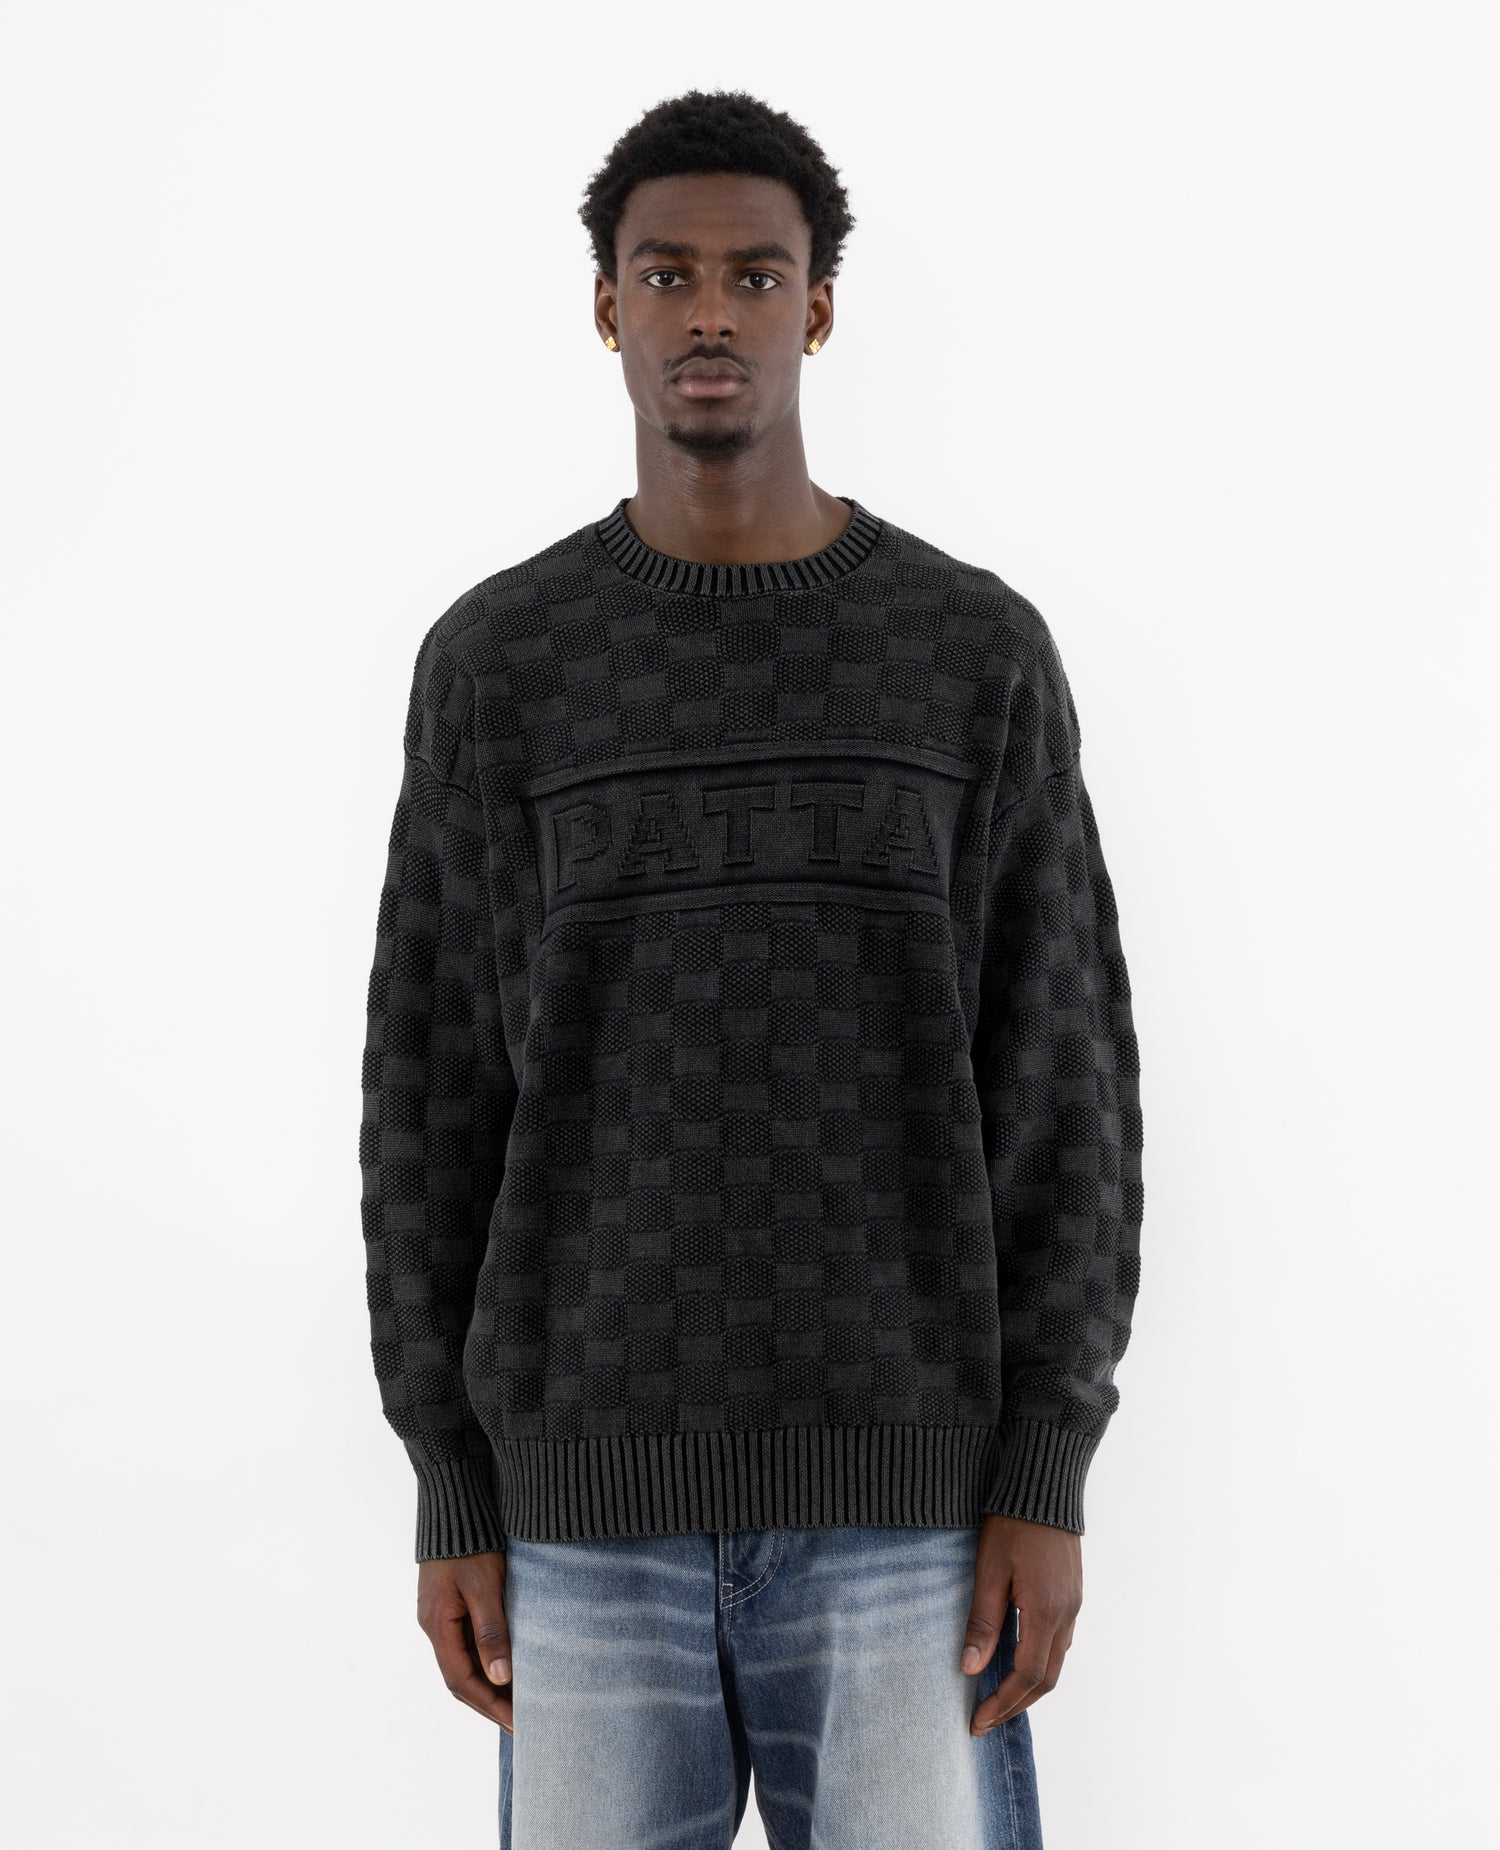 Patta Purl Ribbed Knitted Sweater (Pirate Black)